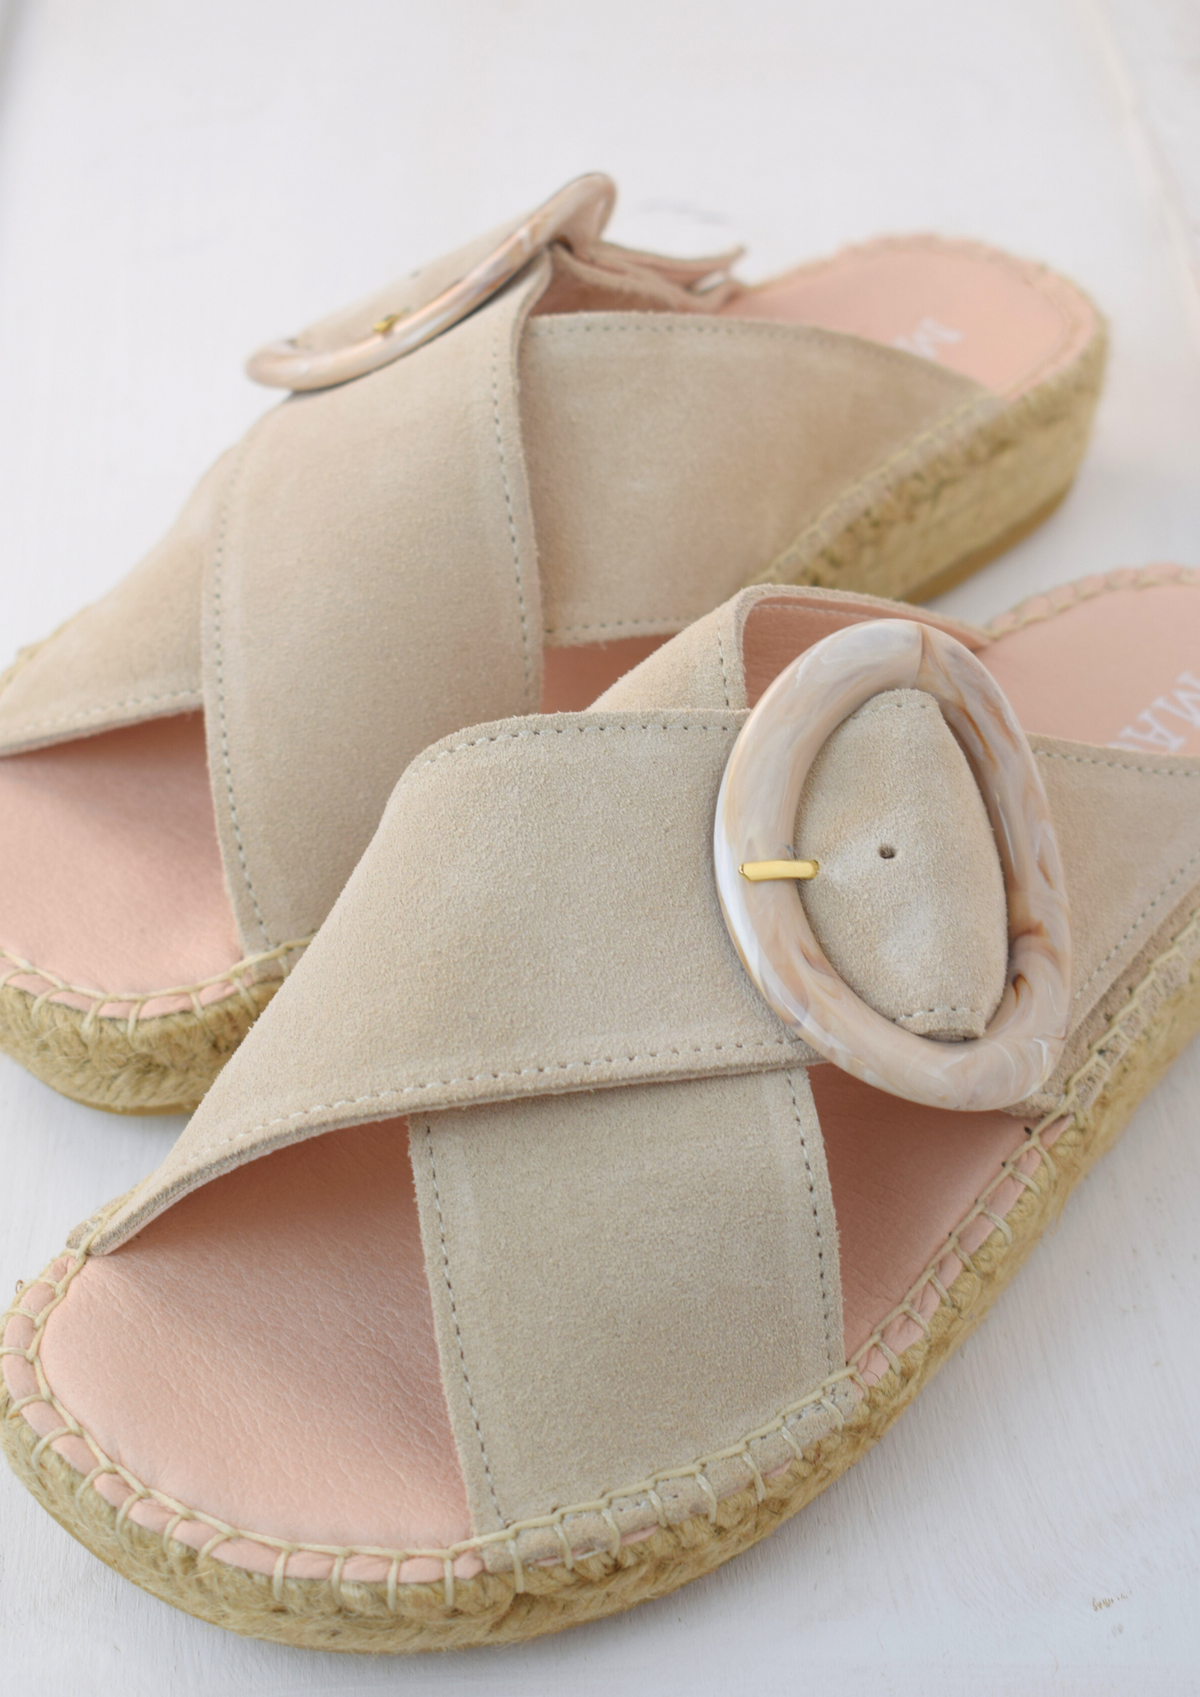 Pale beige slider with buckle detail and raffia sole 